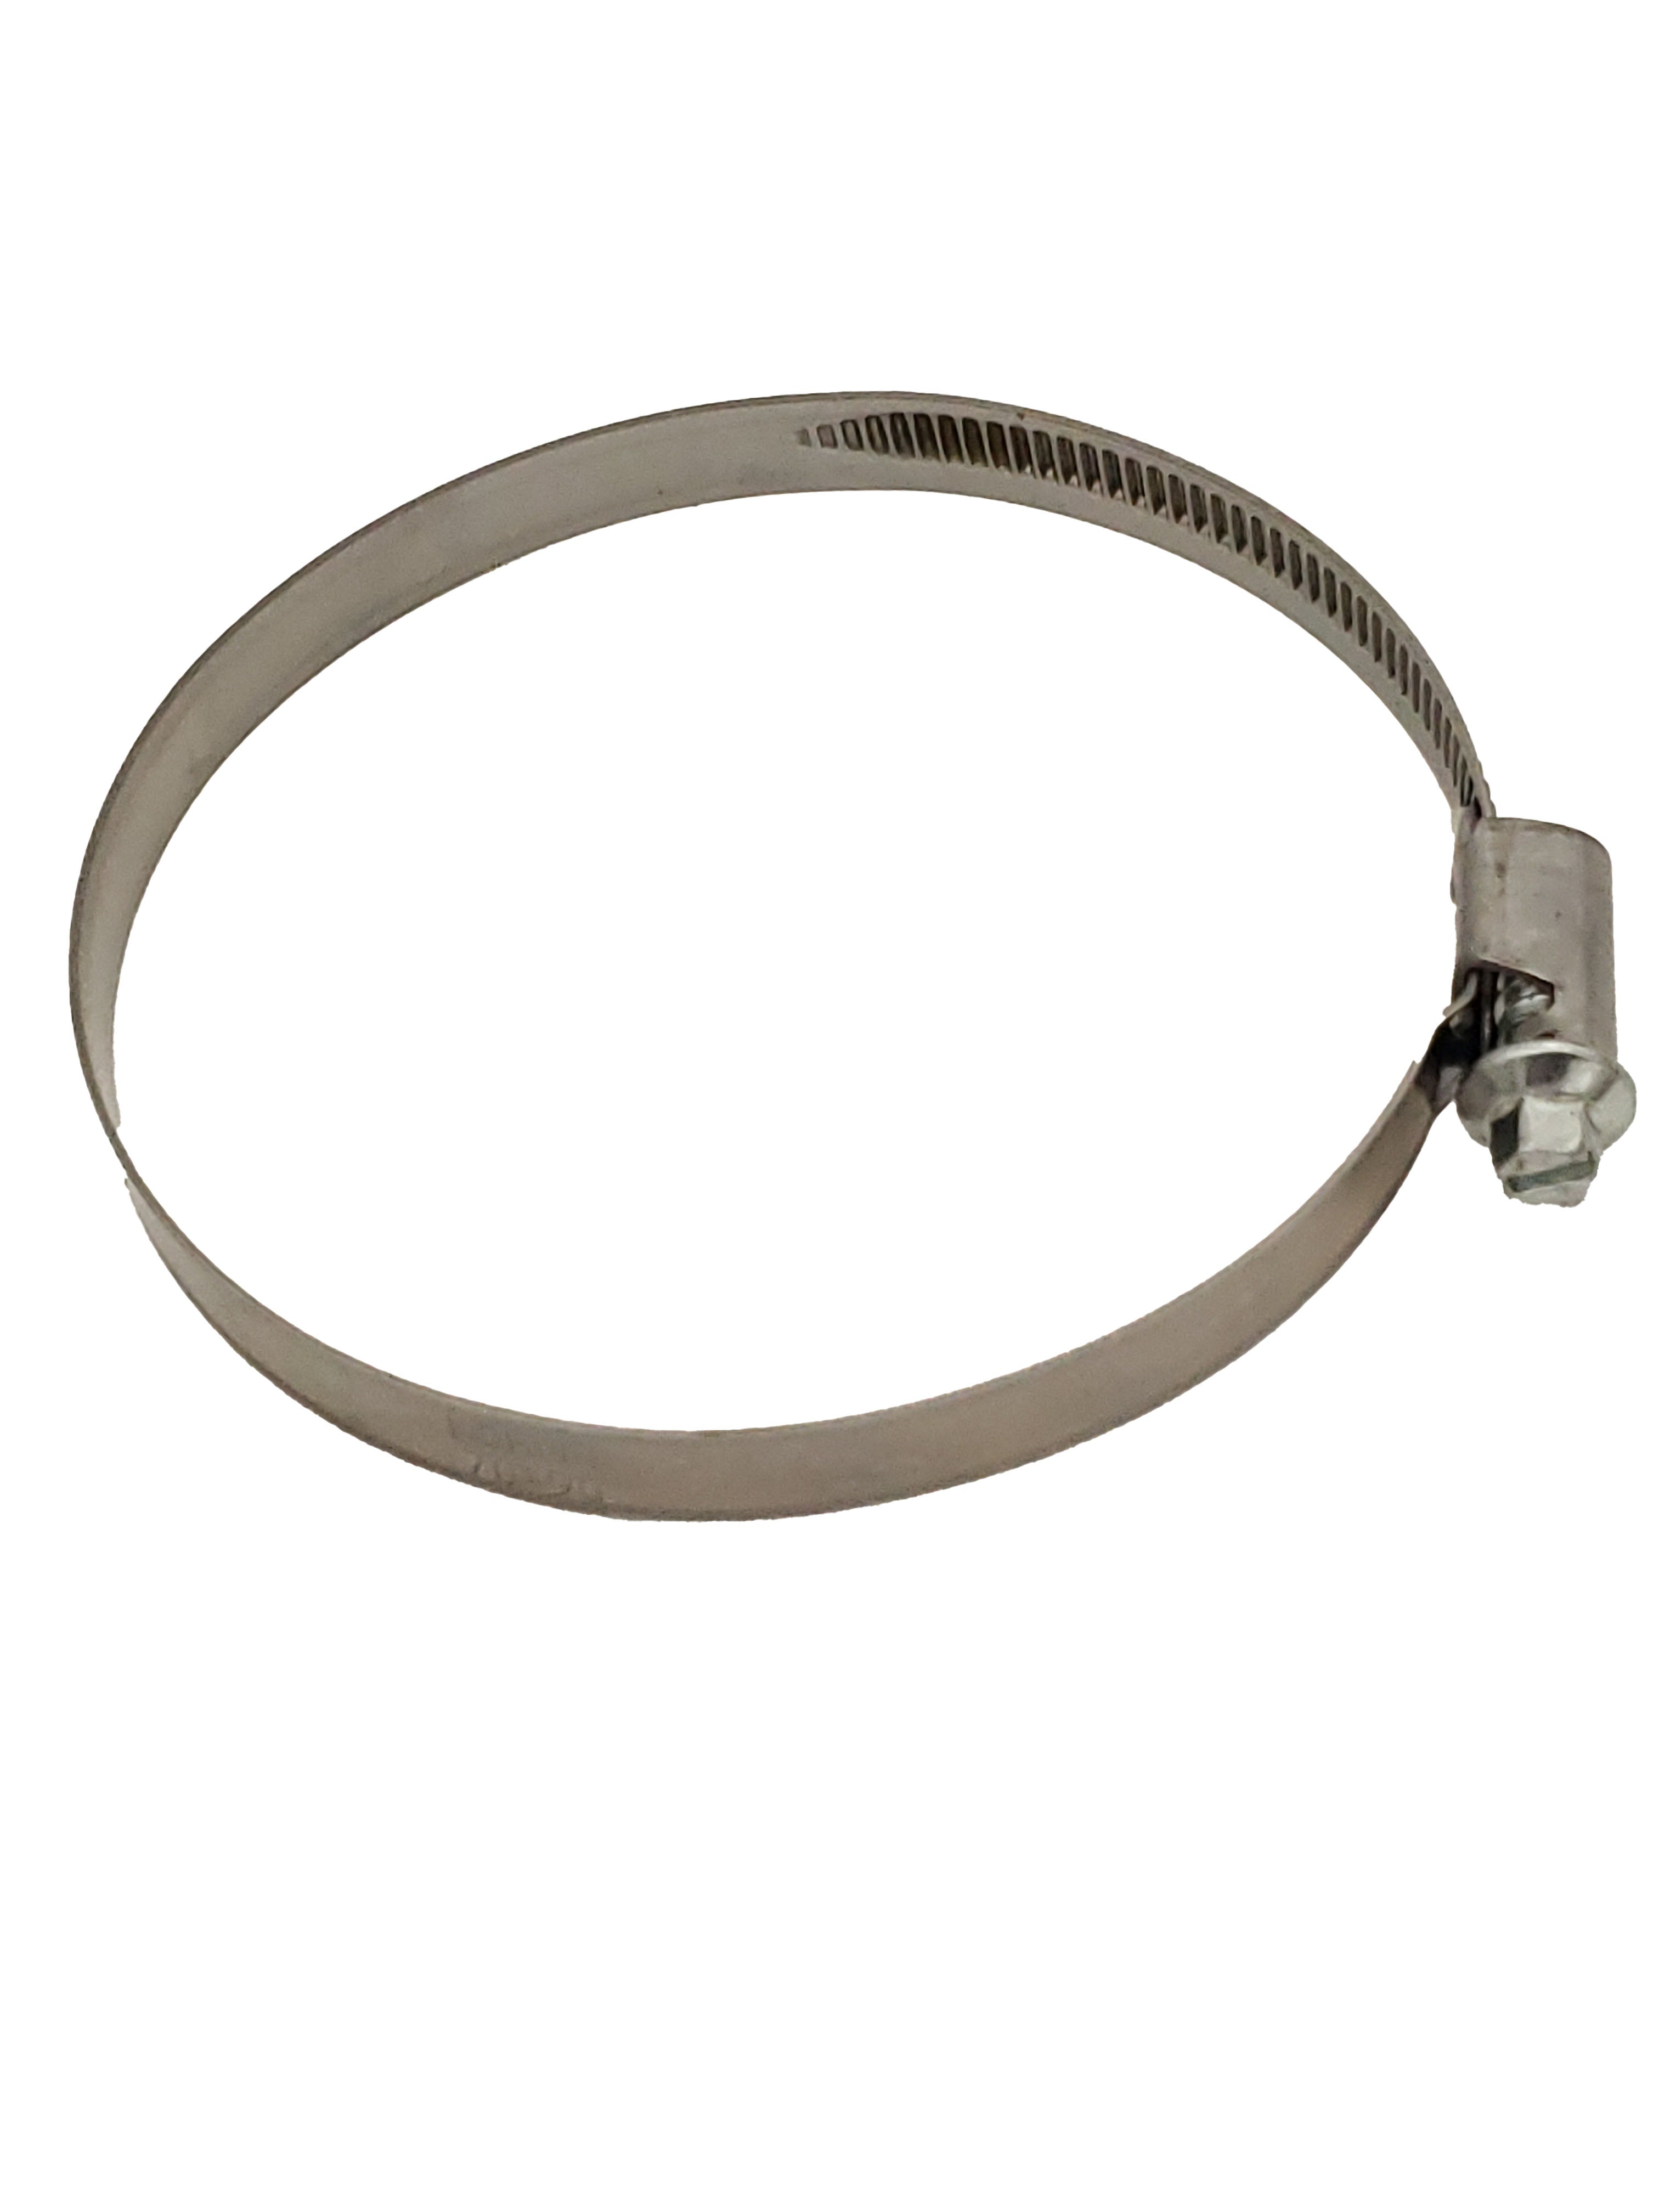 Auveco # 19254 Hose Clamp 70mm - 90mm Clamping Range. Qty 10.